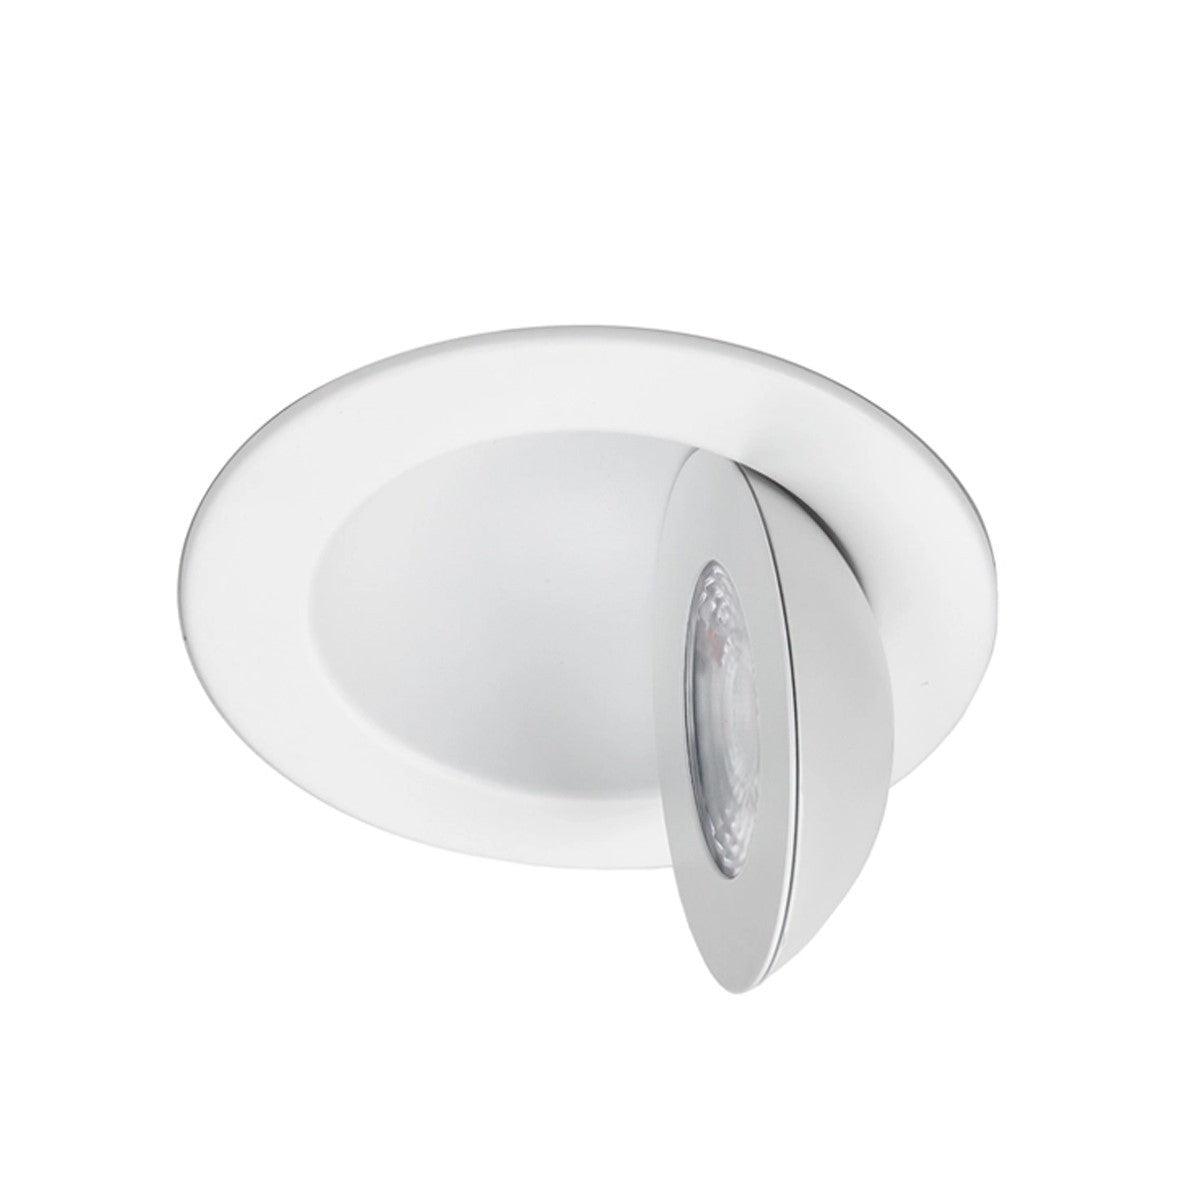 6 In. Lotos LED Adjustable Canless LED Recessed Light, 15 Watt, 1340 Lumens, Selectable CCT, 2700K to 5000K, 120/277V